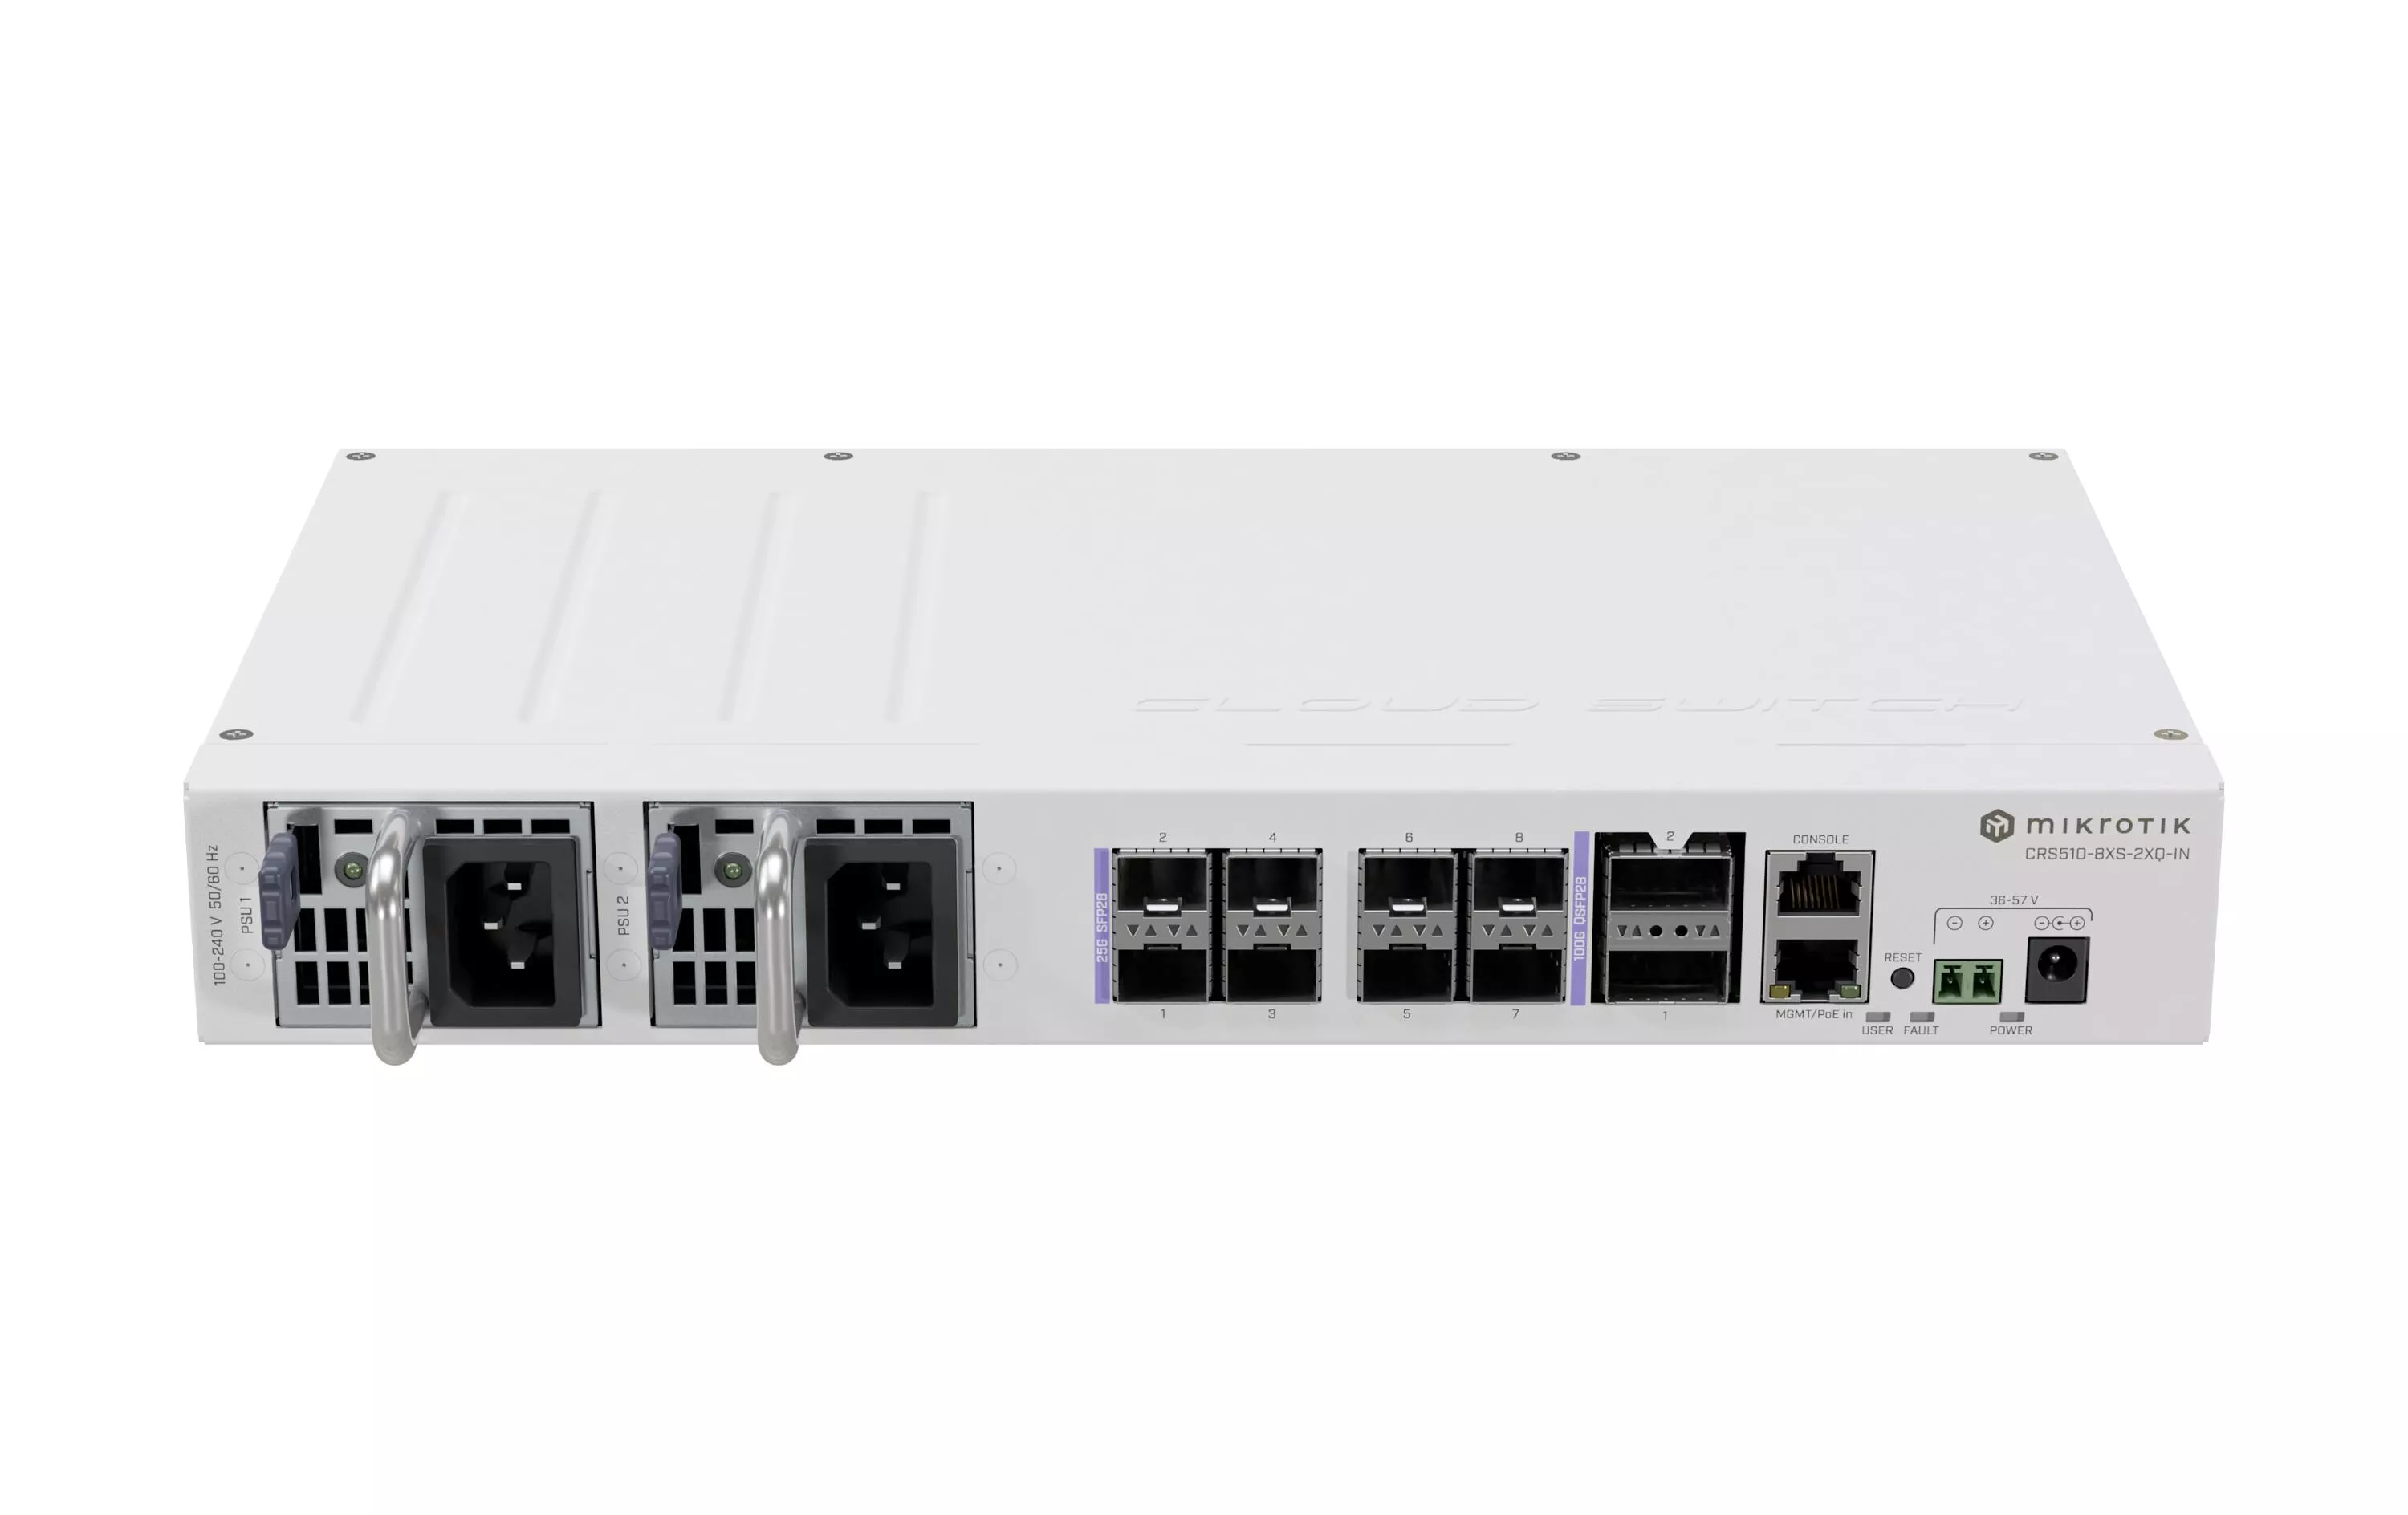 SFP28 Switch CRS510-8XS-2XQ-IN 10 ports